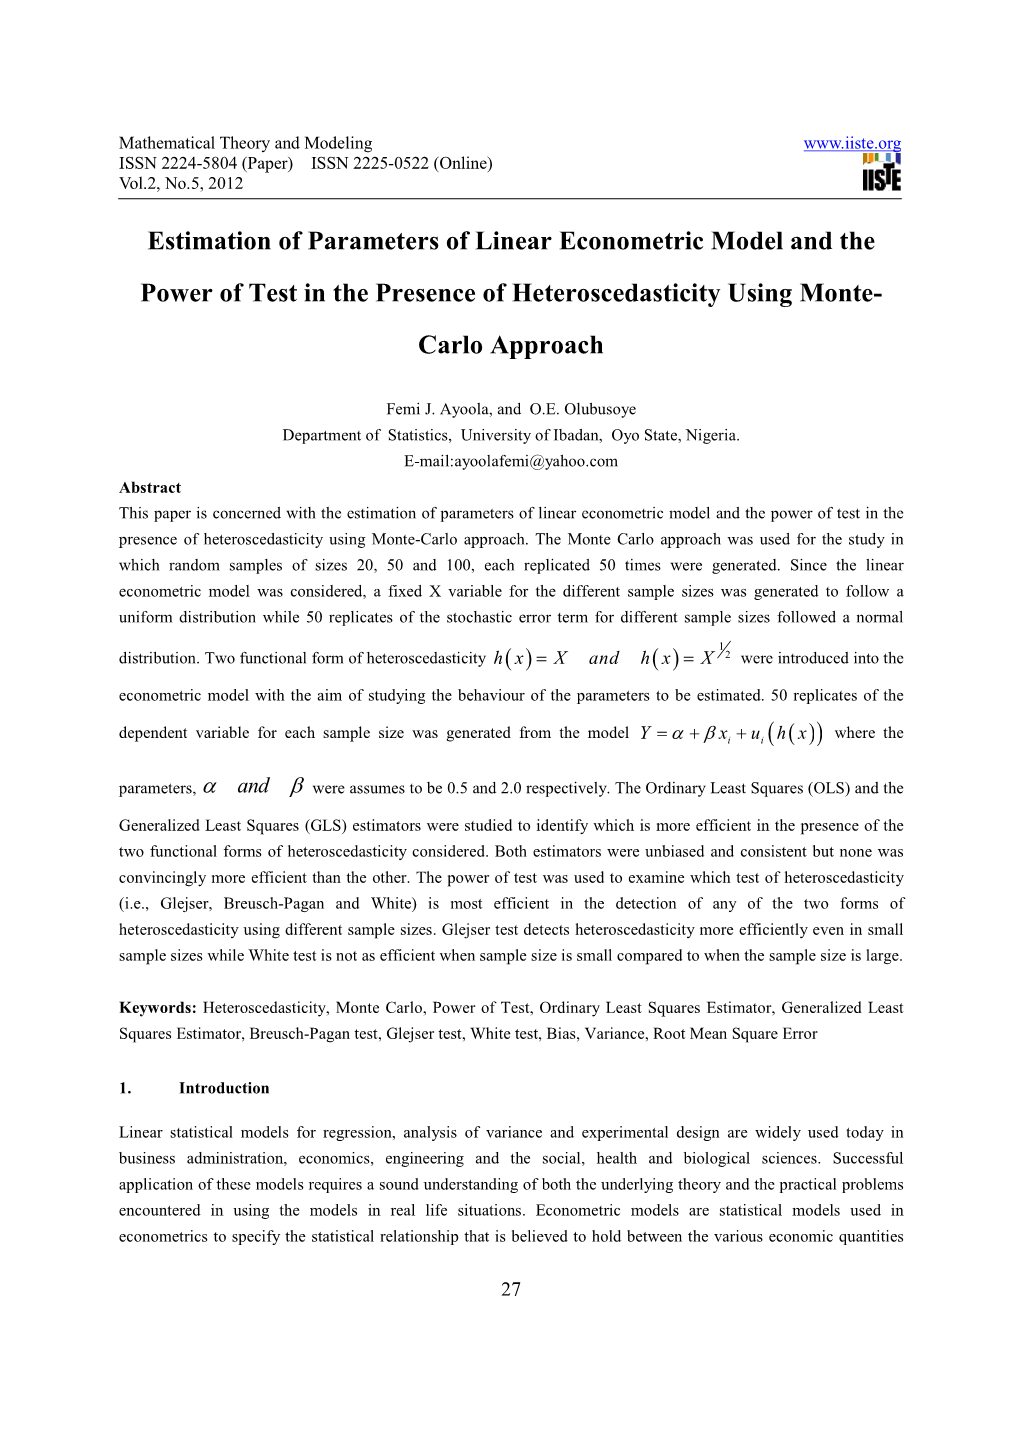 Estimation of Parameters of Linear Econometric Model and the Power of Test in the Presence of Heteroscedasticity Using Monte� Carlo Approach